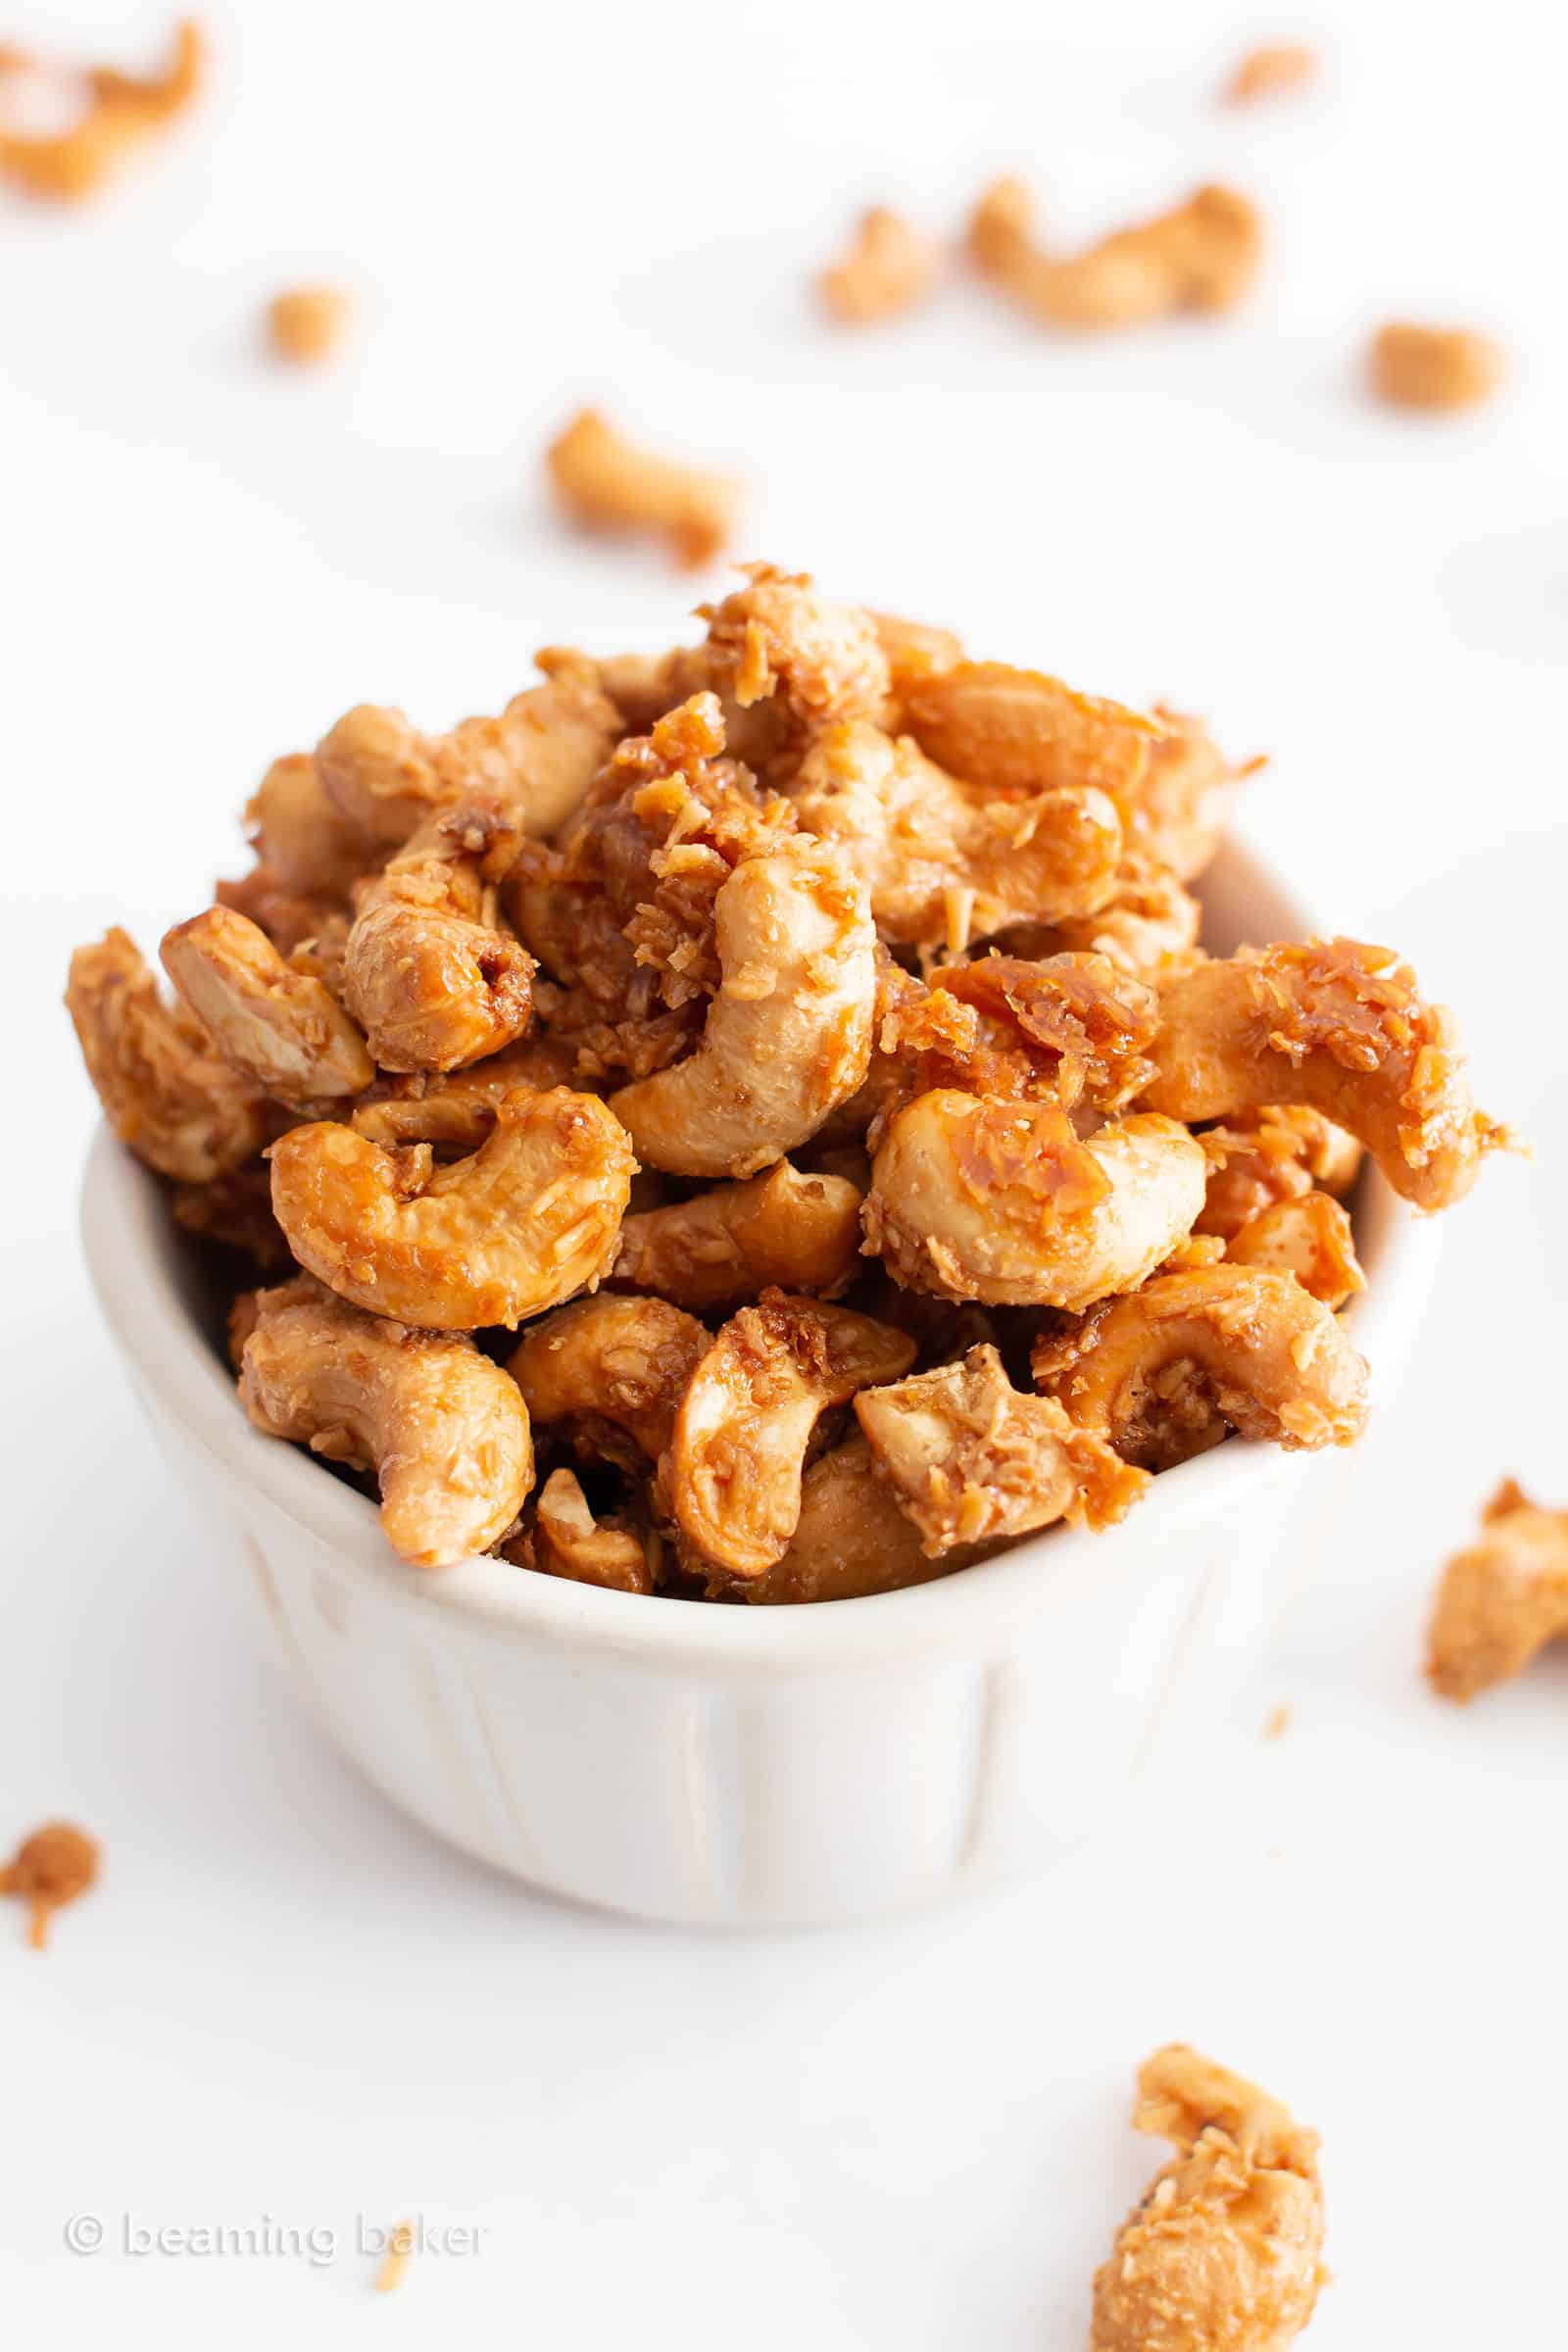 4 Ingredient Toasted Coconut Cashews Recipe (Paleo, GF): this vegan toasted coconut cashews recipe is gluten free & paleo! The crunchiest coconut coated roasted cashews, made with 4 ingredients. Dairy-Free. #Paleo #Cashews #Coconut #Vegan #GlutenFree | Recipe at BeamingBaker.com